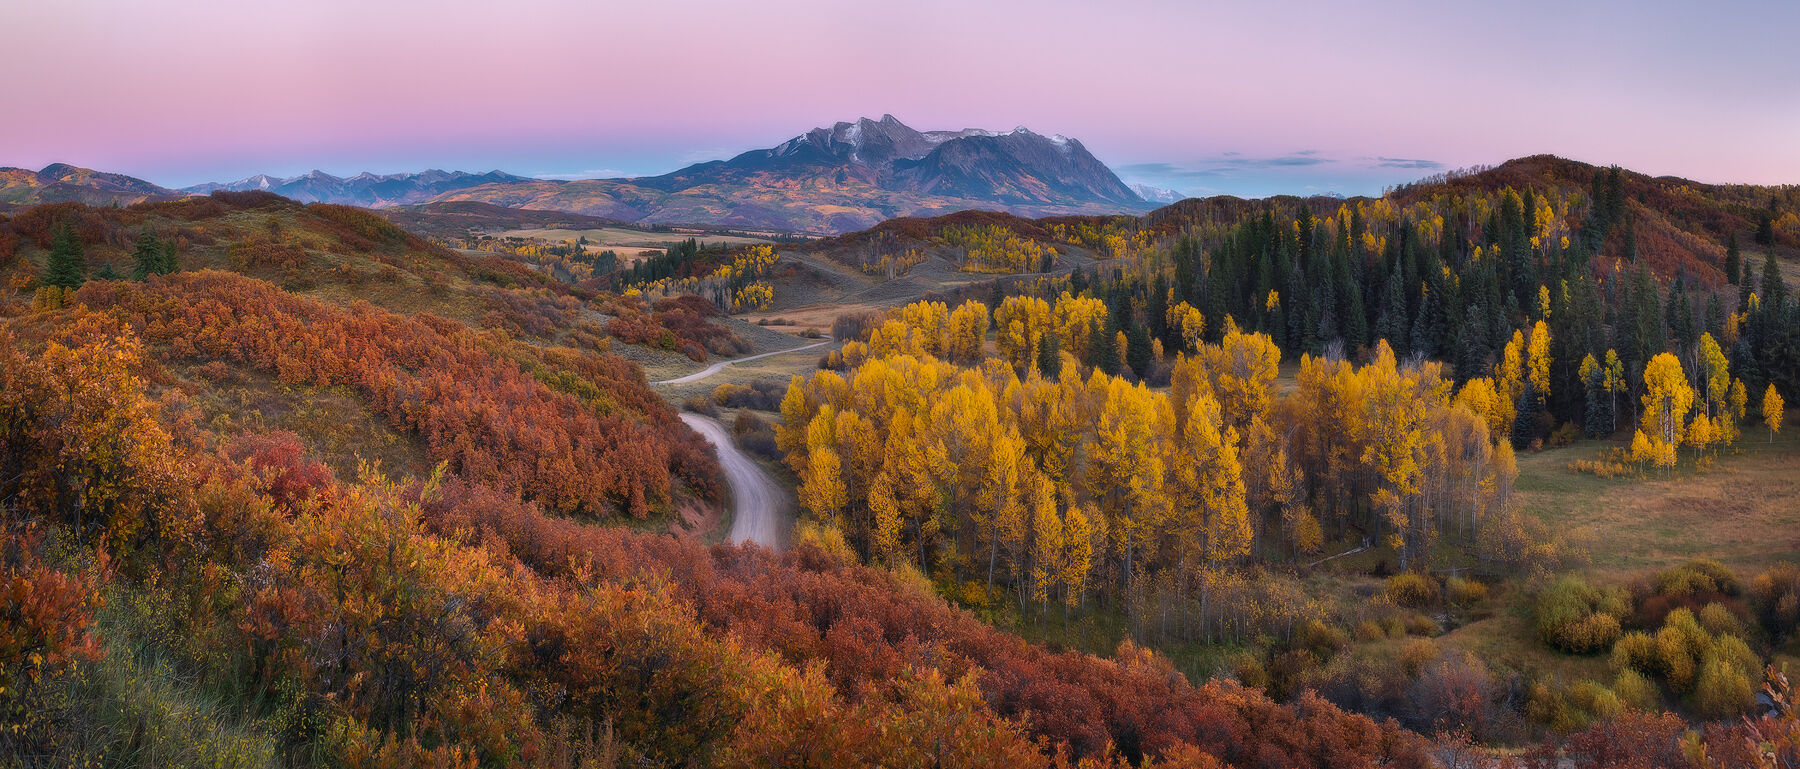 Fall color hillsides are seen with a dirt road winding through the scene and mountains in the background.